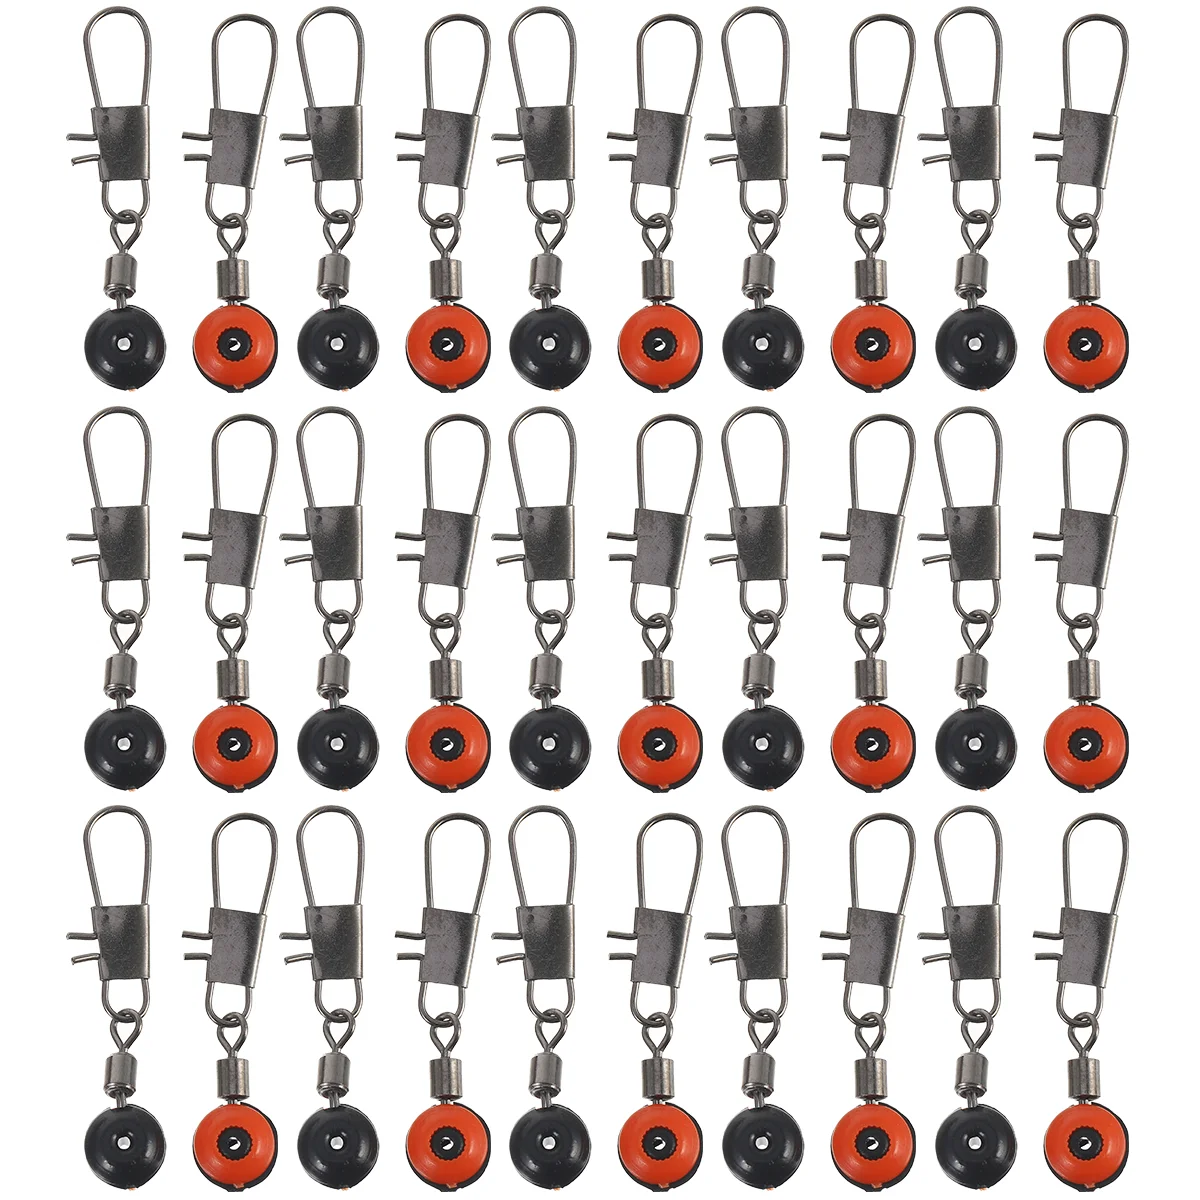 

100 Pcs Accessories Space Bean Connector Fishing Tackle Hook Clip Stainless Steel Line Sinker Slider Swivel